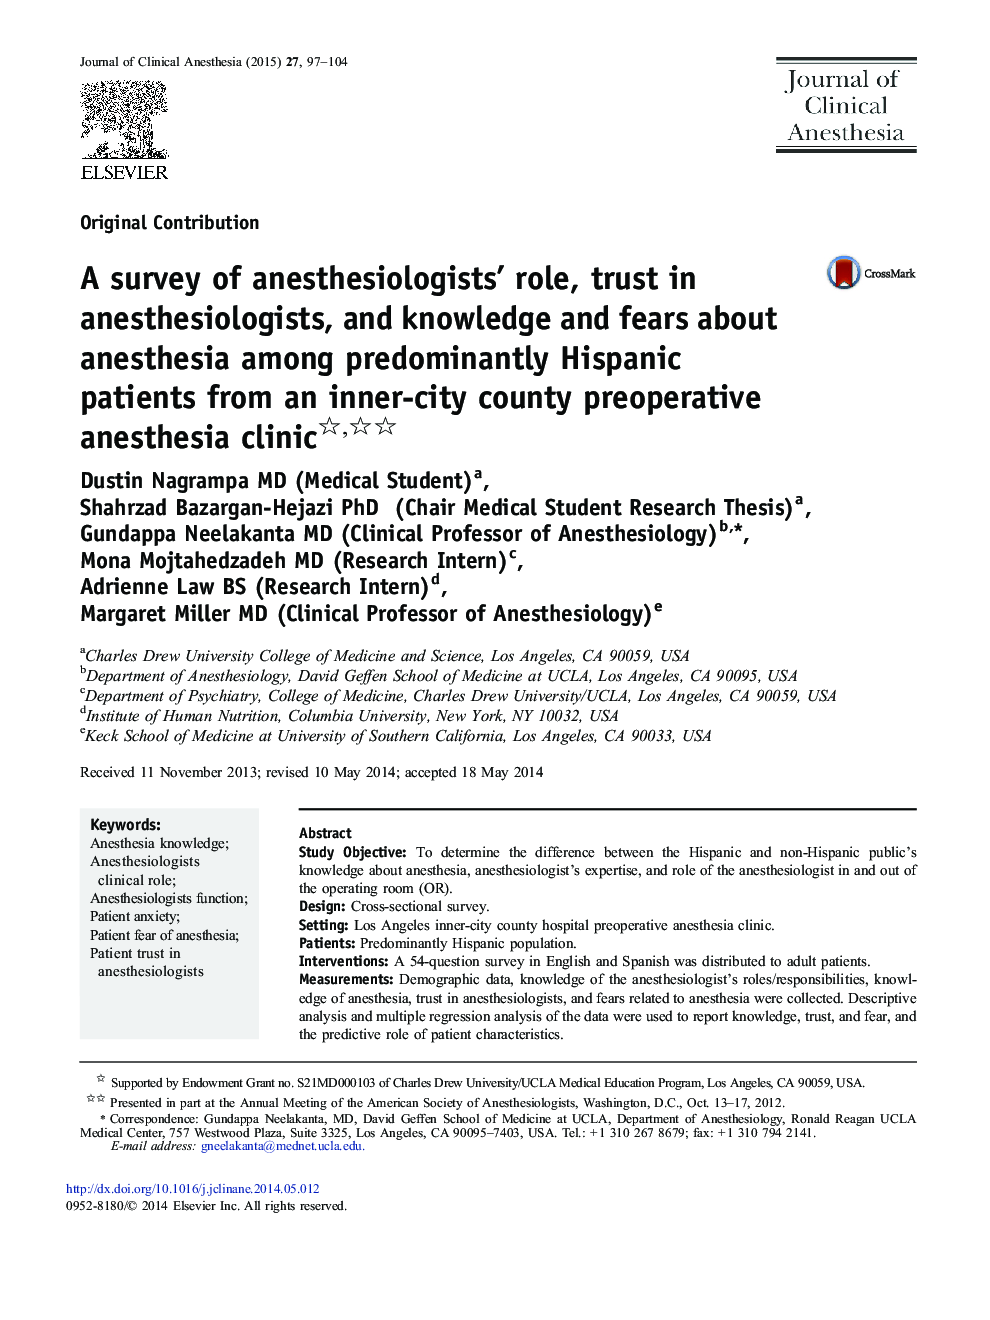 A survey of anesthesiologists’ role, trust in anesthesiologists, and knowledge and fears about anesthesia among predominantly Hispanic patients from an inner-city county preoperative anesthesia clinic 